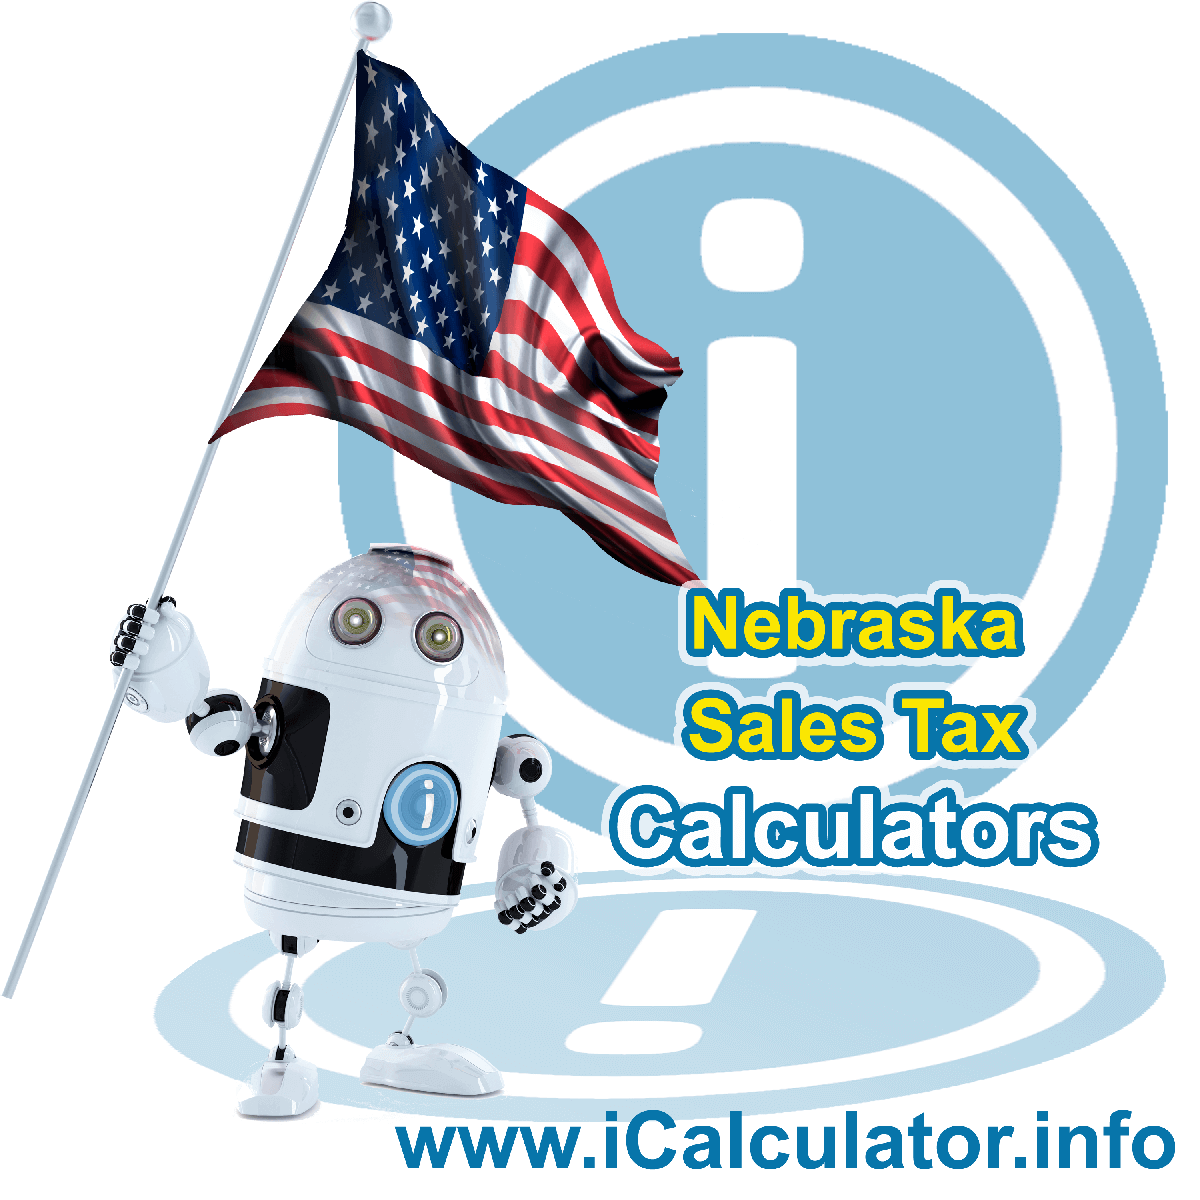 Lyons Sales Rates: This image illustrates a calculator robot calculating Lyons sales tax manually using the Lyons Sales Tax Formula. You can use this information to calculate Lyons Sales Tax manually or use the Lyons Sales Tax Calculator to calculate sales tax online.